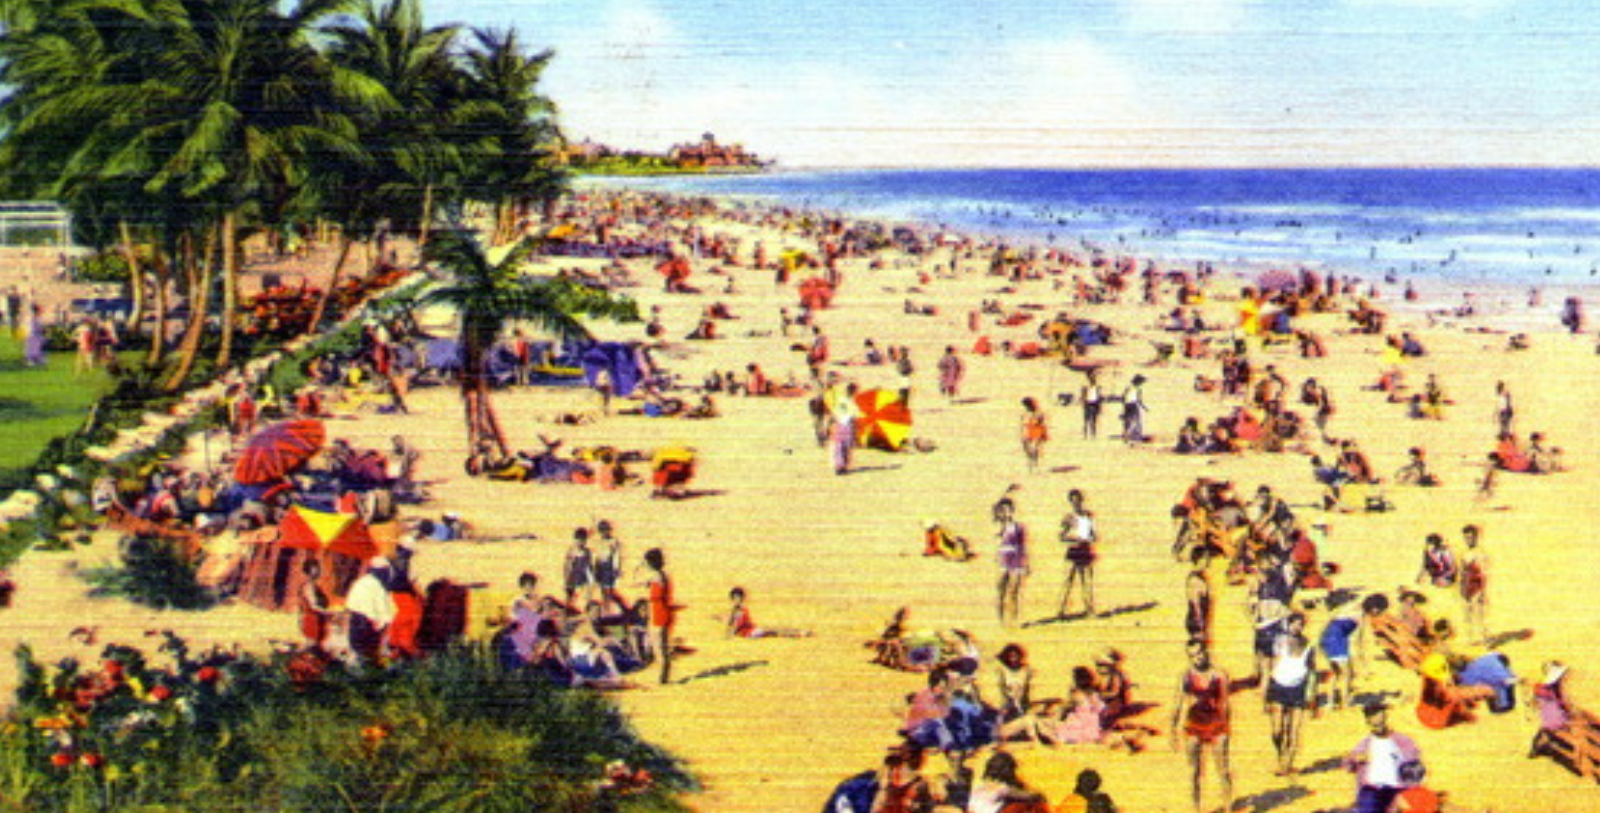 Image of South Beach, Miami, an illustrated postcard from the 1950s